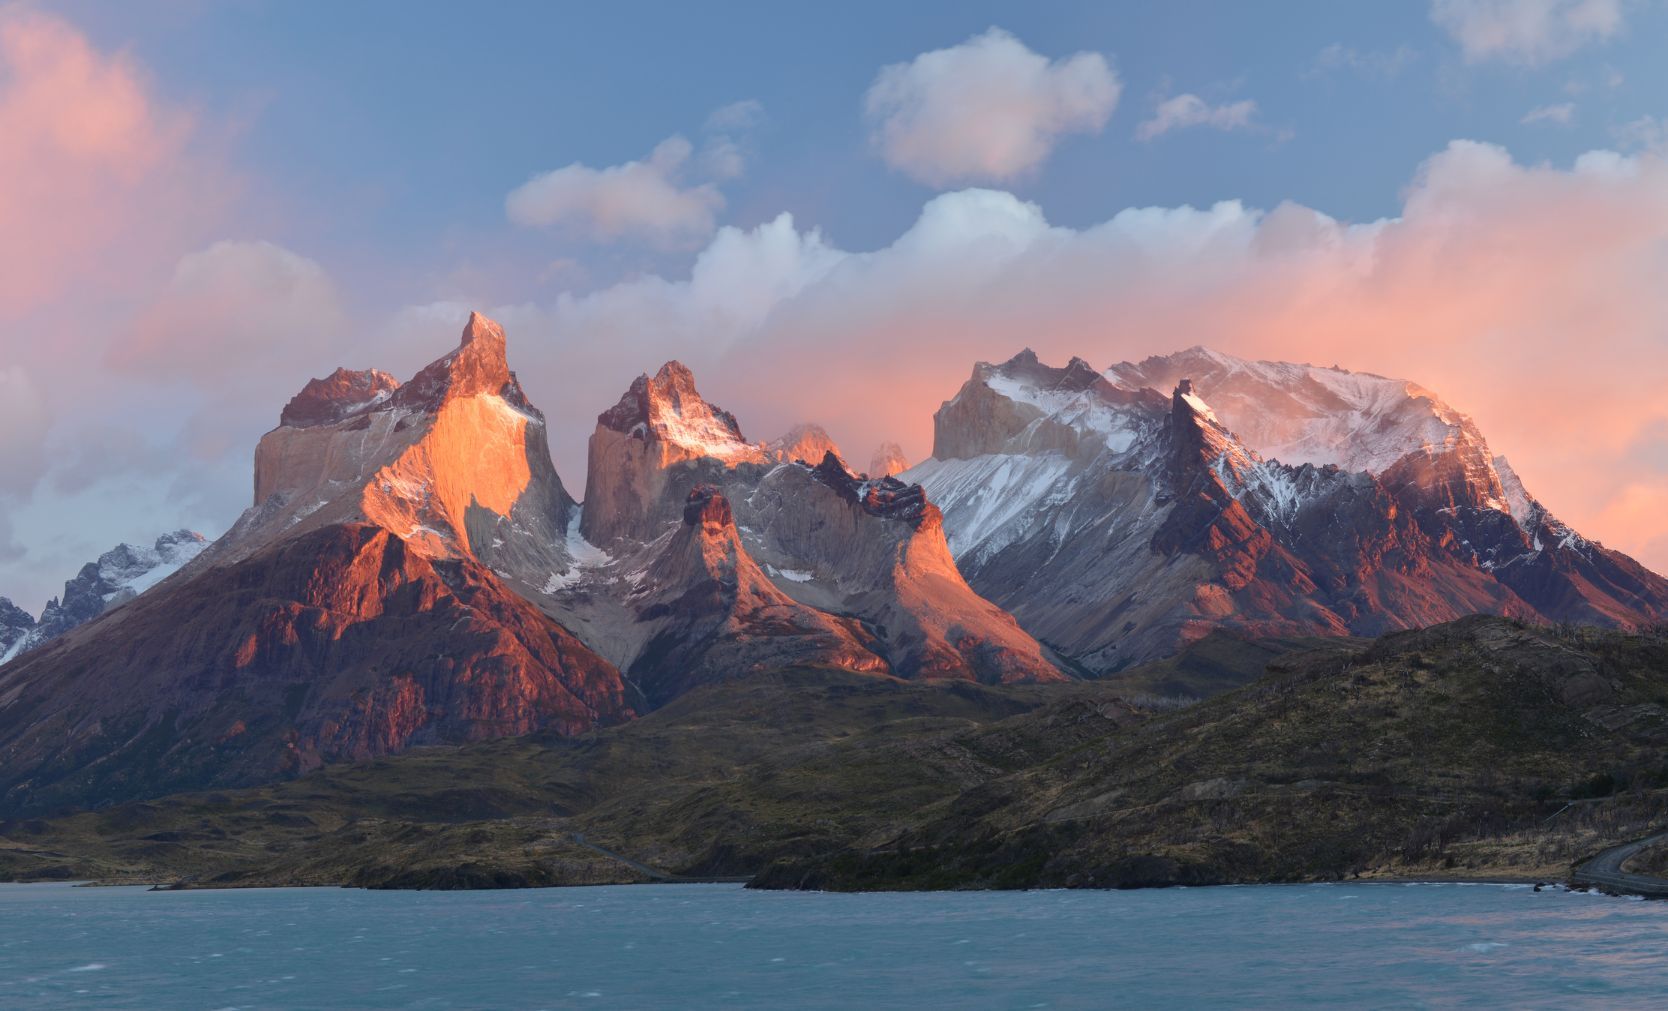 A view of the W Trek, one of the most famous treks in Patagonia and Torres del Paine national park